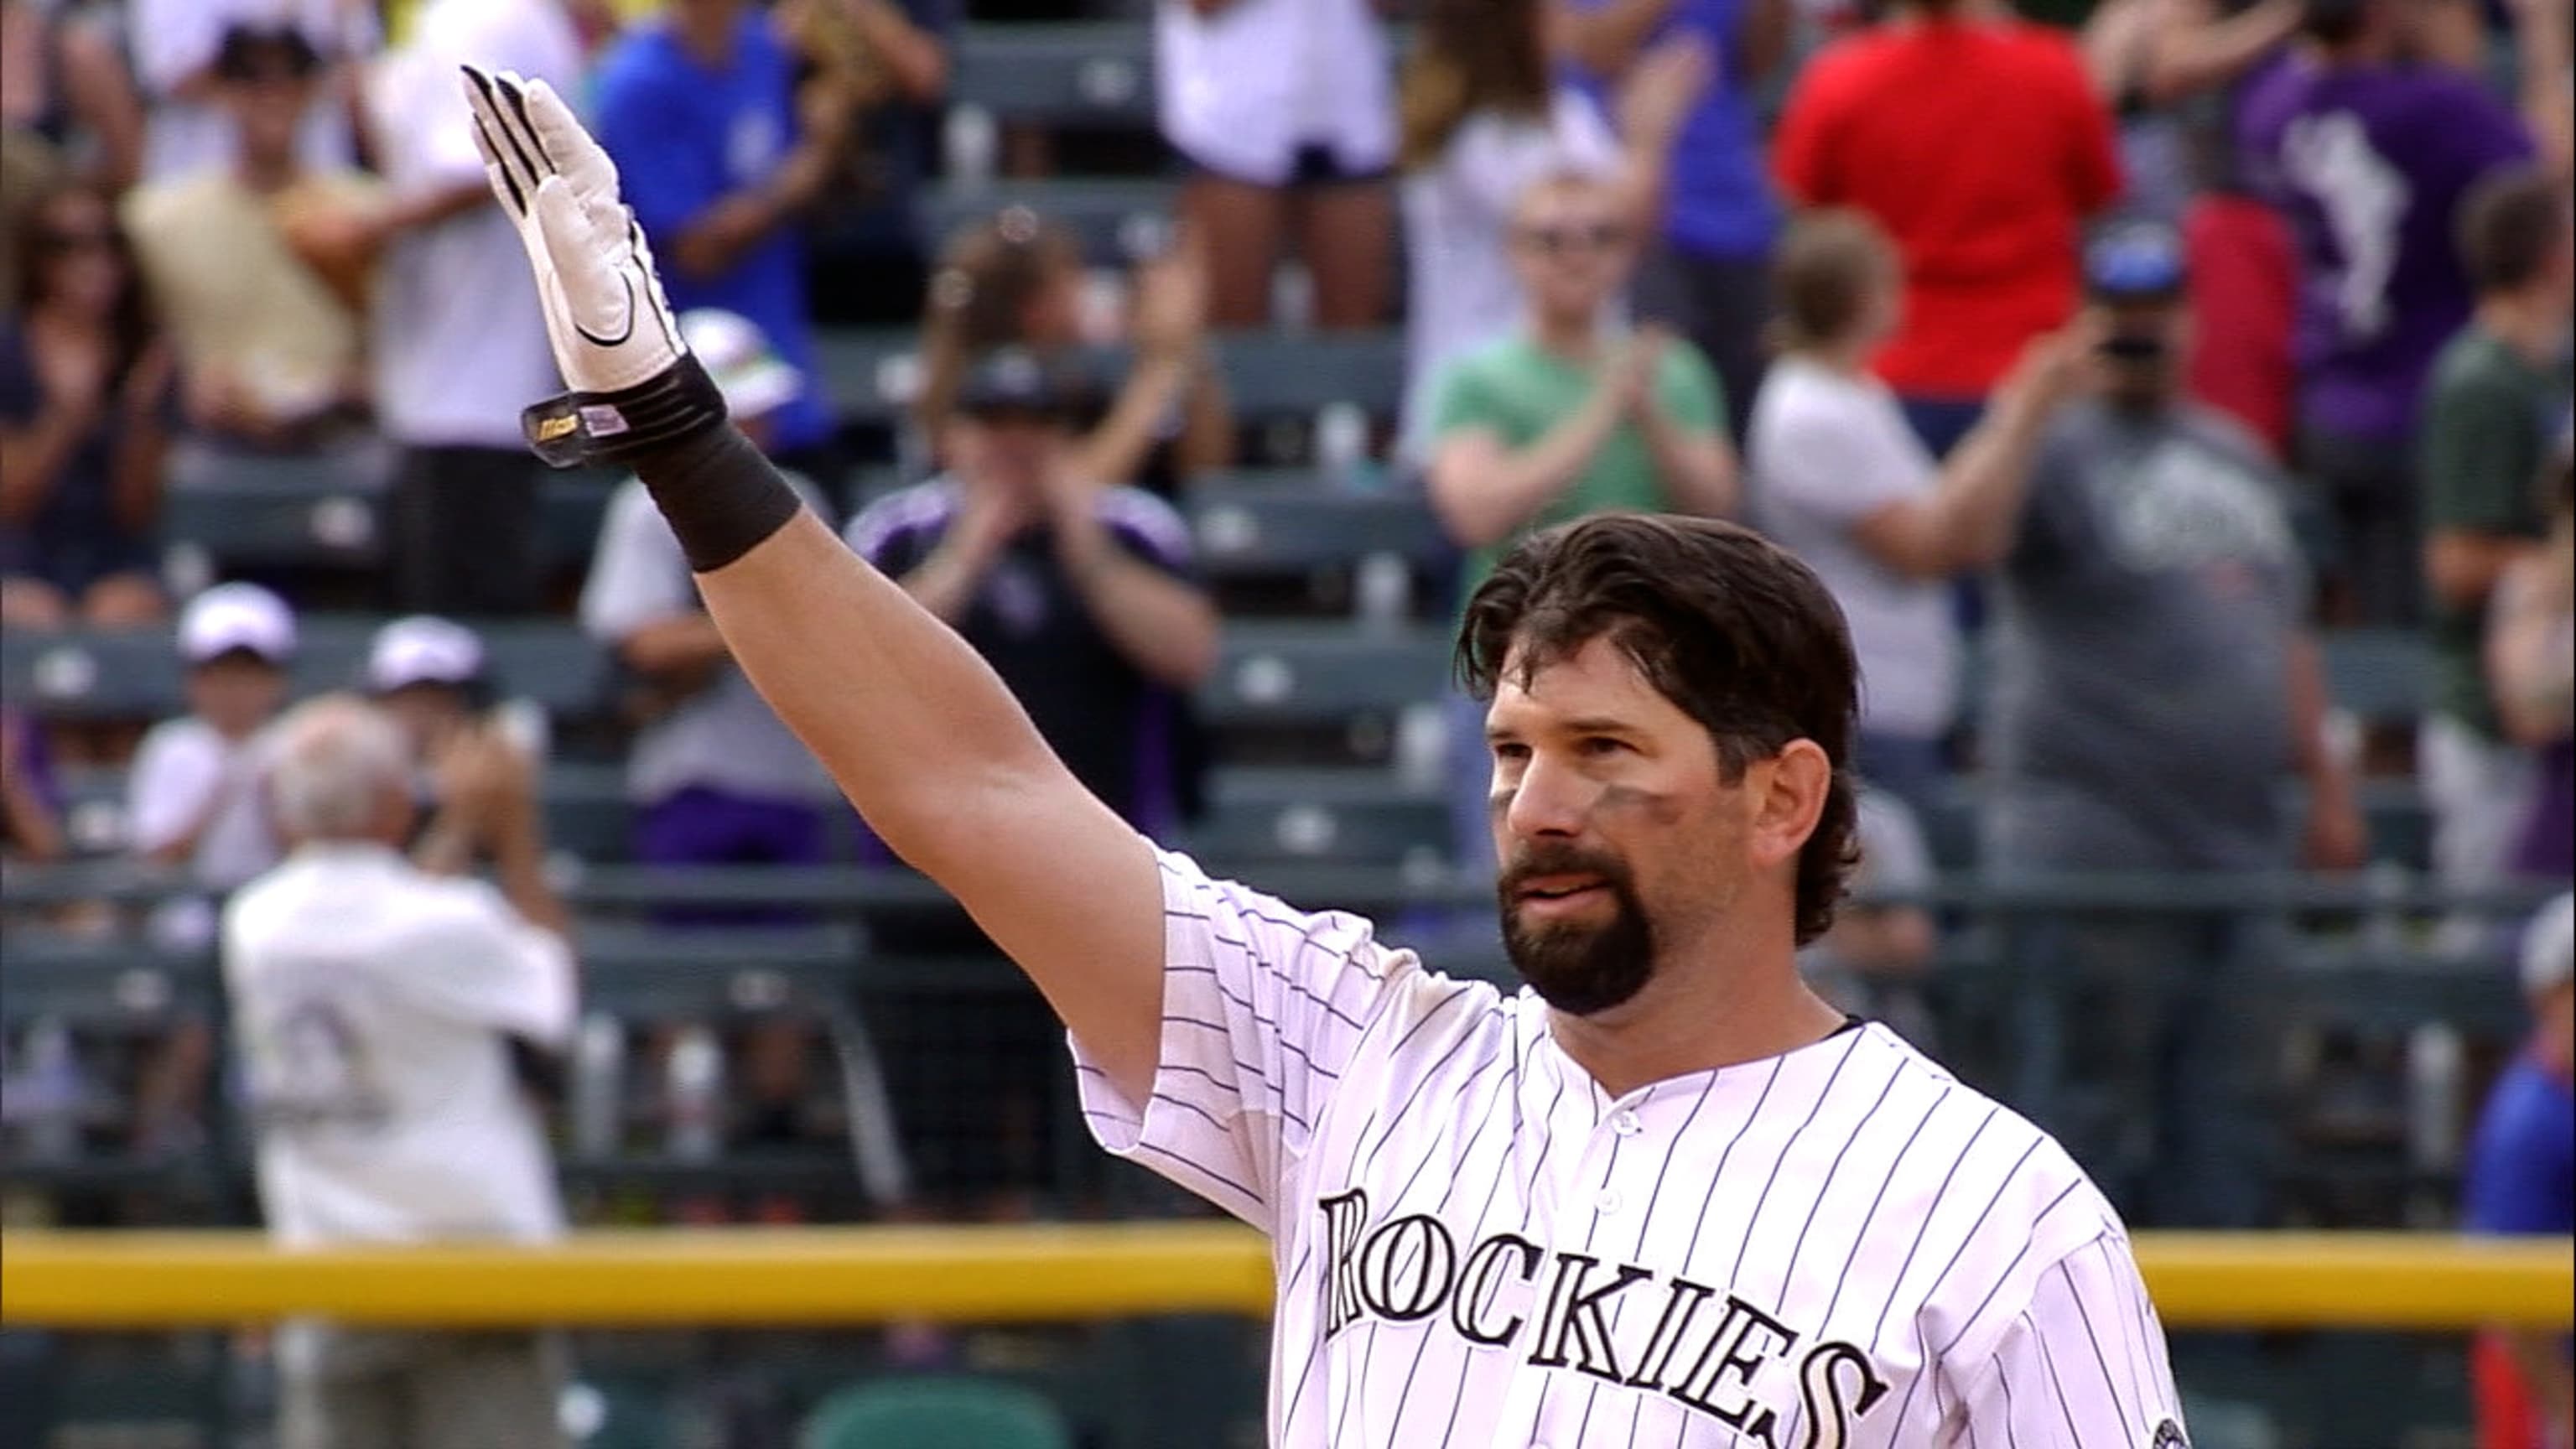 As 2022 dawns, Todd Helton showing progress in Hall of Fame voting